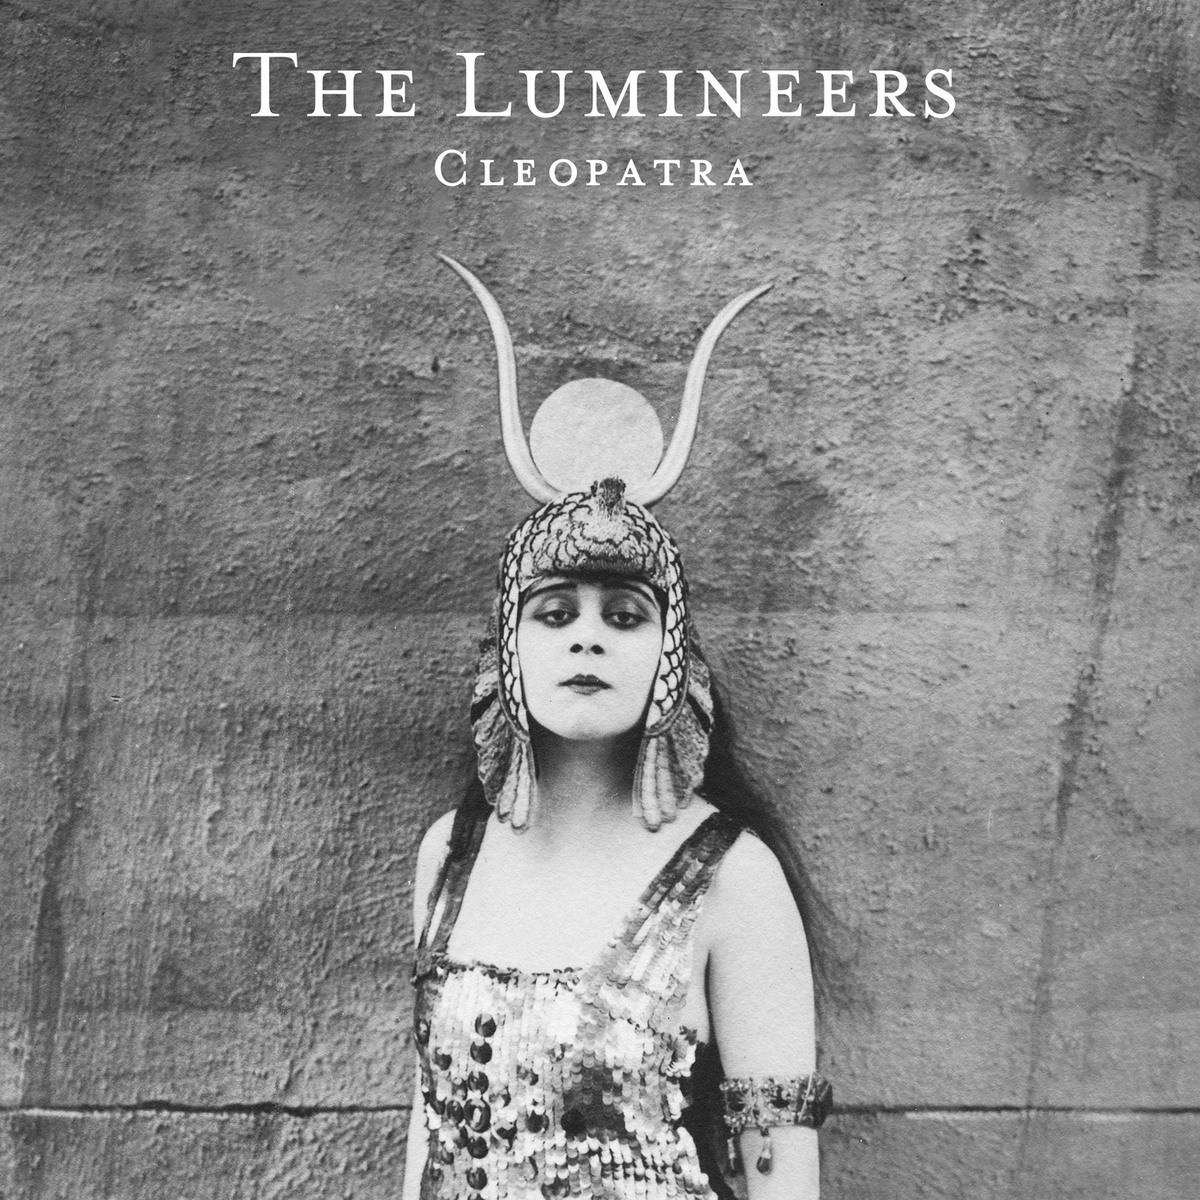 The Lumineers - Cleopatra {Deluxe Edition} (2016) [Qobuz FLAC 24bit/96kHz]